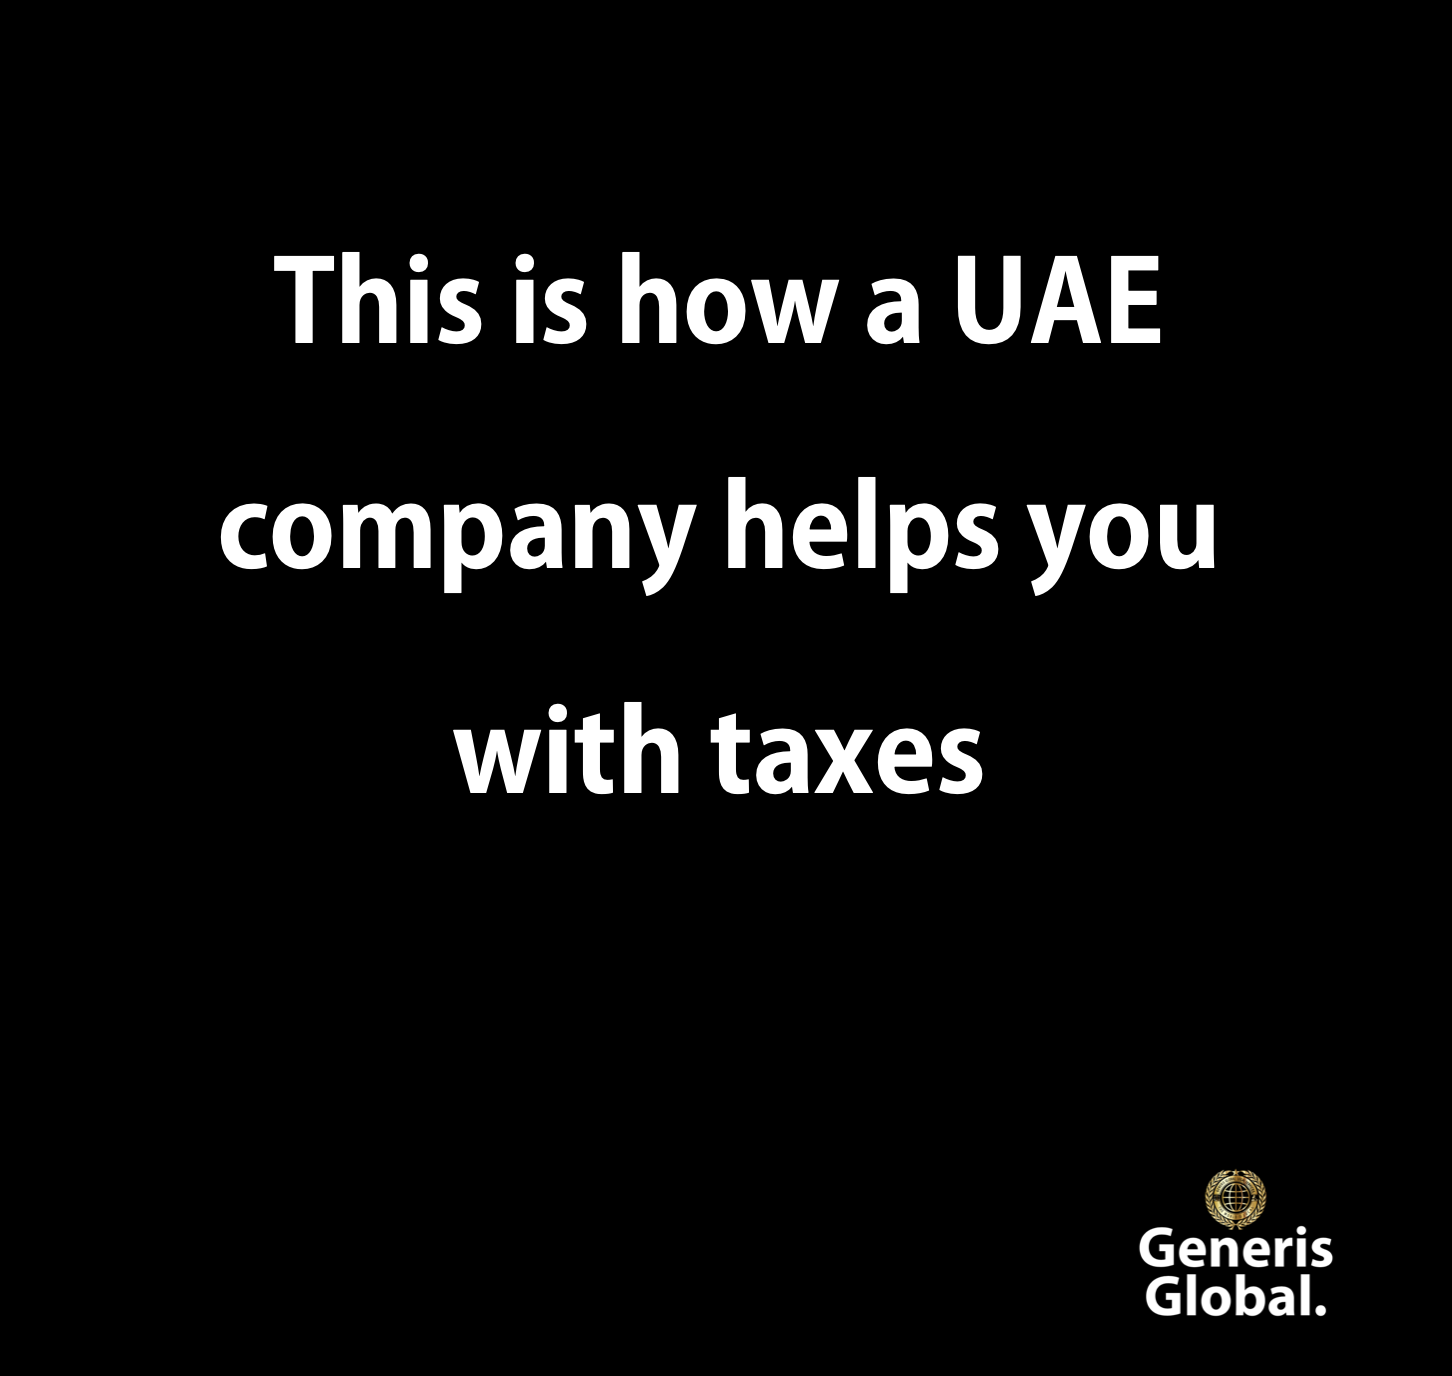 This is how a UAE company helps you with taxes